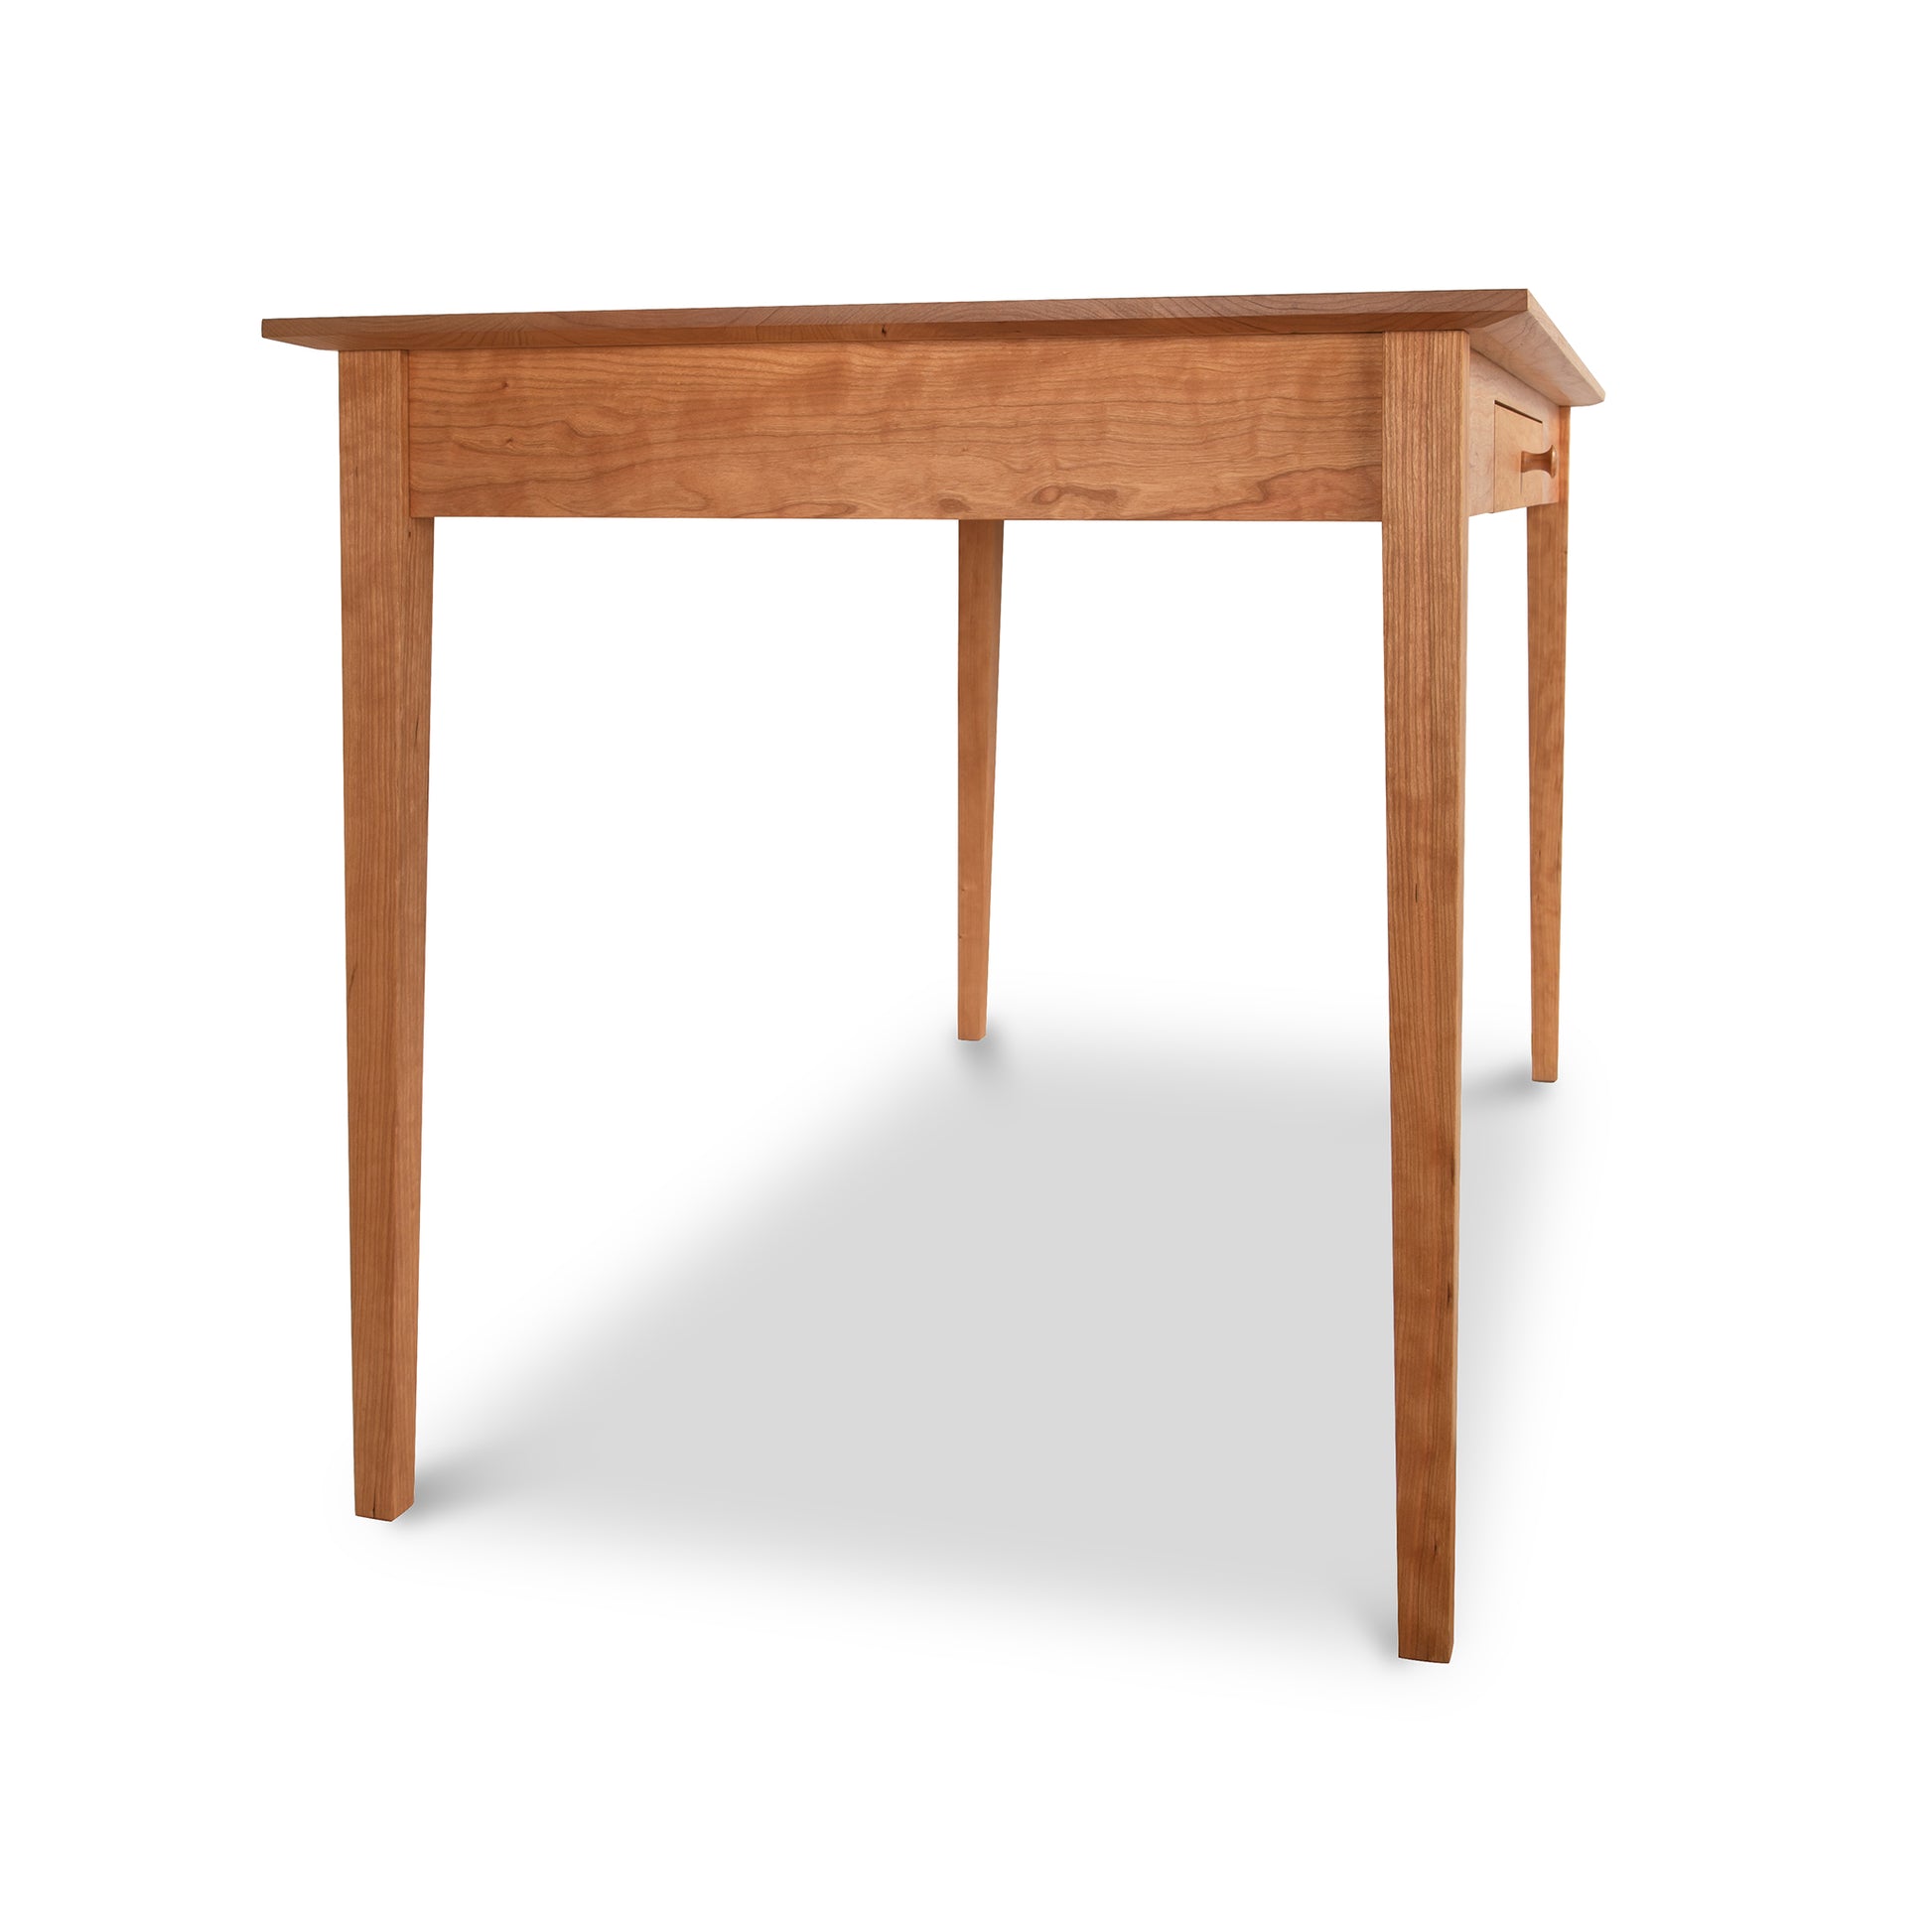 An Maple Corner Woodworks American Shaker writing desk crafted from sustainably harvested hardwood with a simple design and a drawer, isolated on a white background.